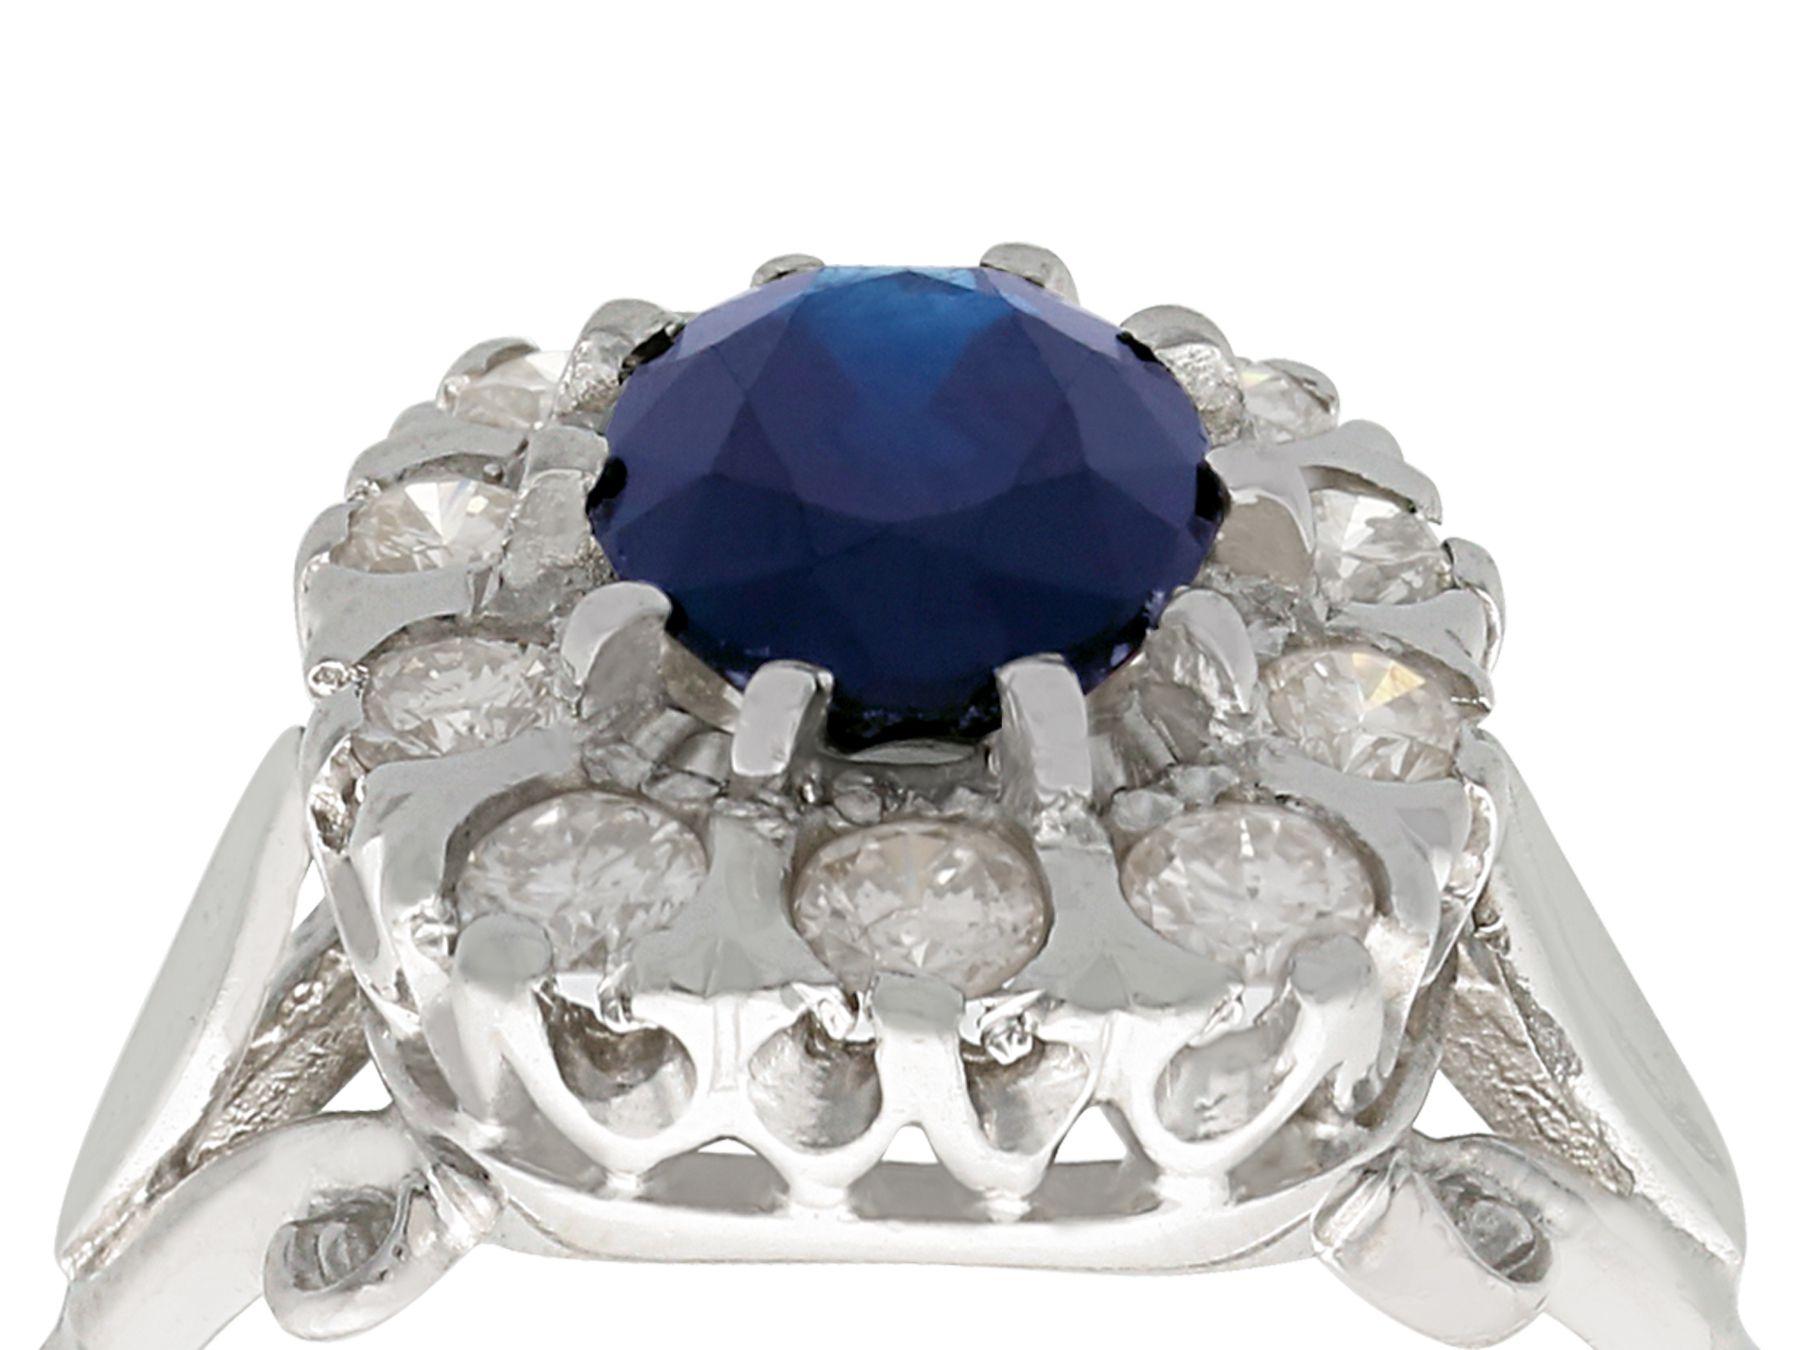 A stunning, fine and impressive vintage 2.85 carat natural blue sapphire and 0.65 carat diamond, 18 karat white gold dress / cluster ring; part of our diverse vintage jewelry/estate jewelry collections

This stunning, fine and impressive sapphire